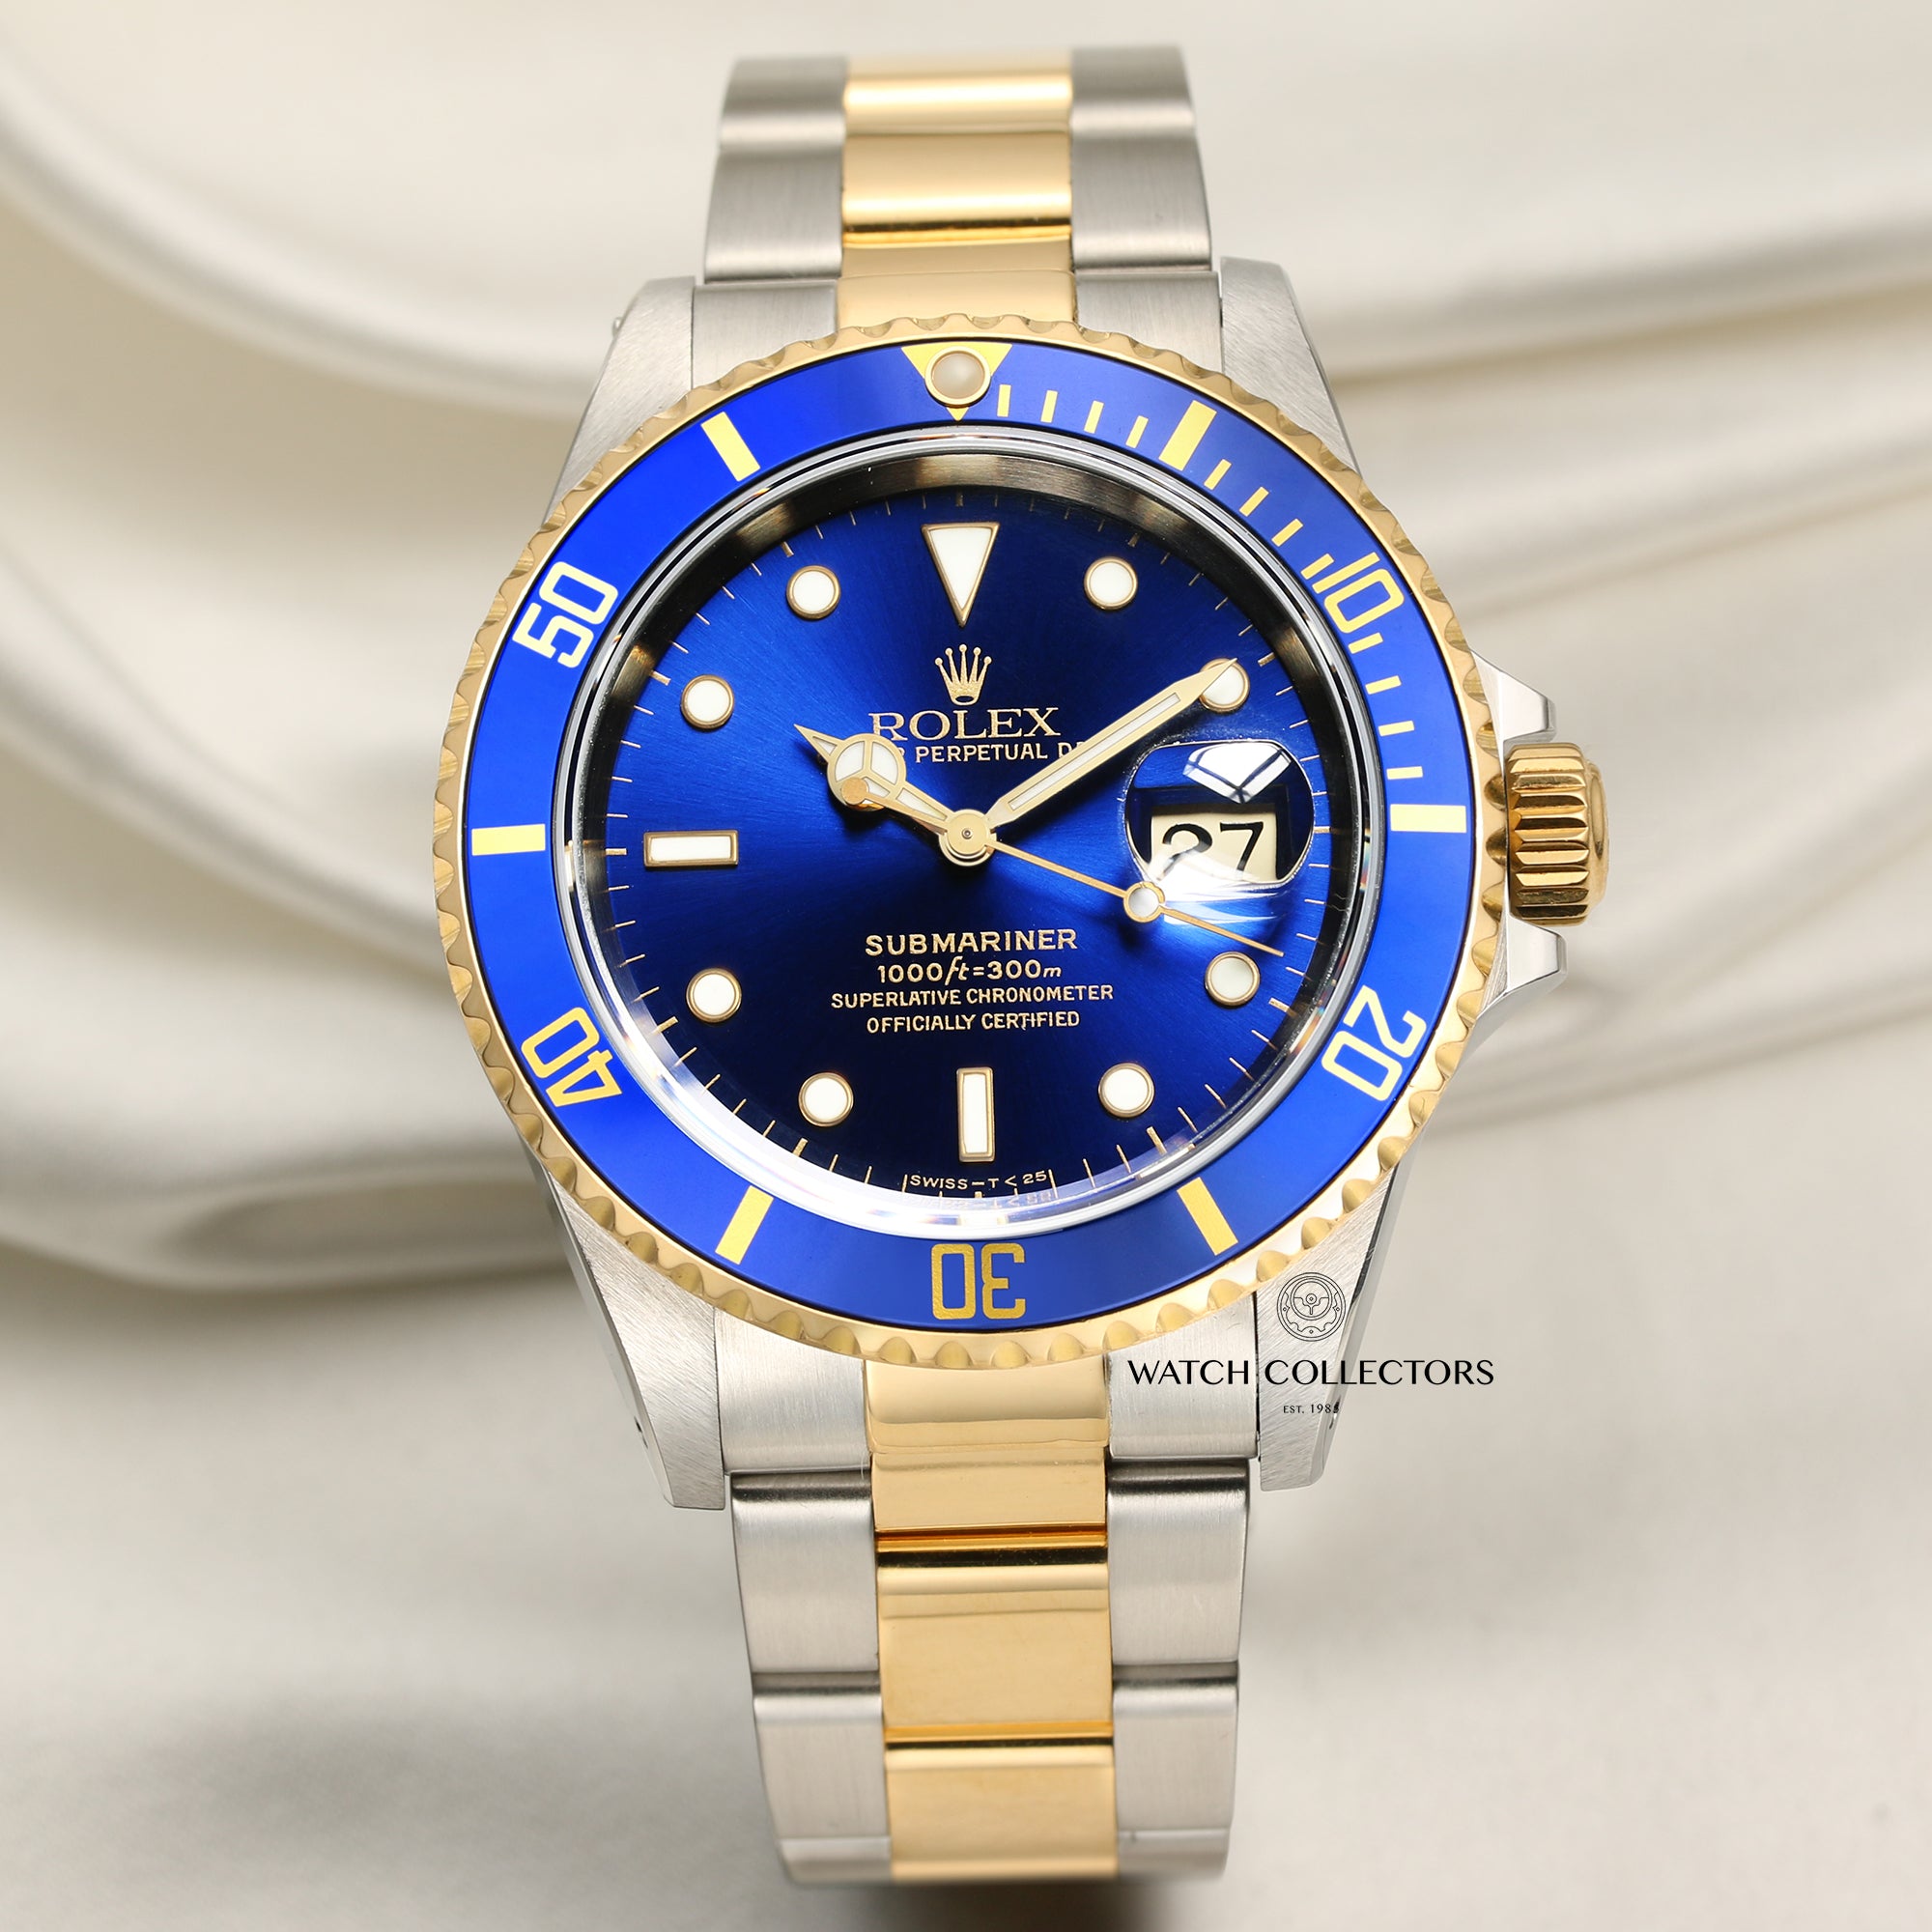 Rolex Submariner 16613 Stainless Steel & 18k Yellow Gold – Watch Collectors